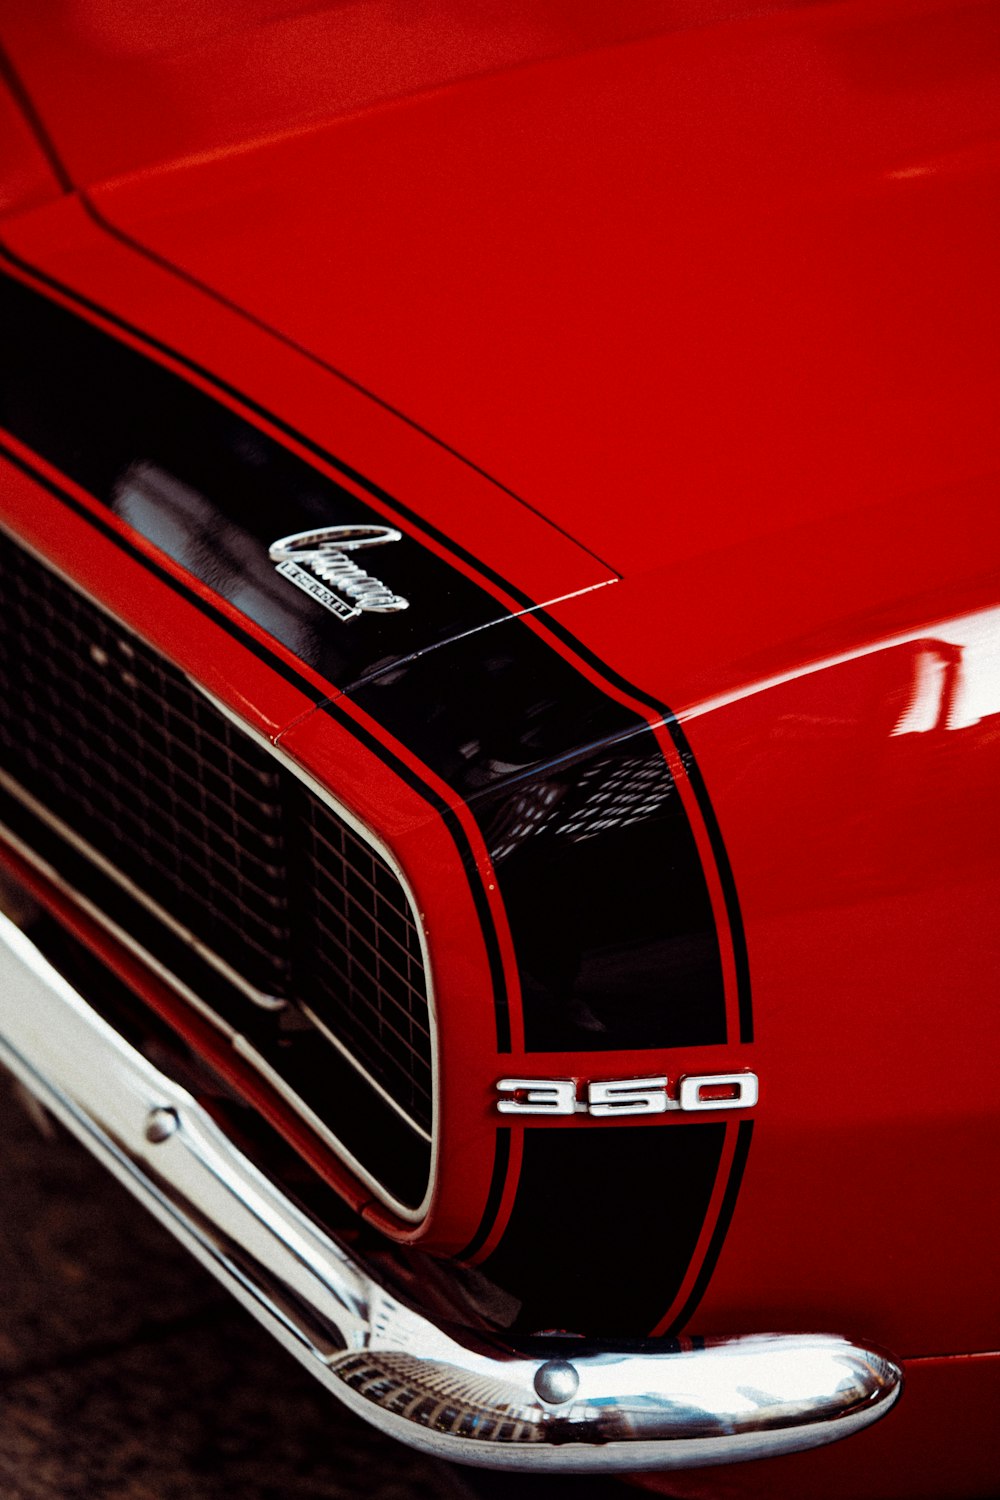 a close up of the front end of a red car